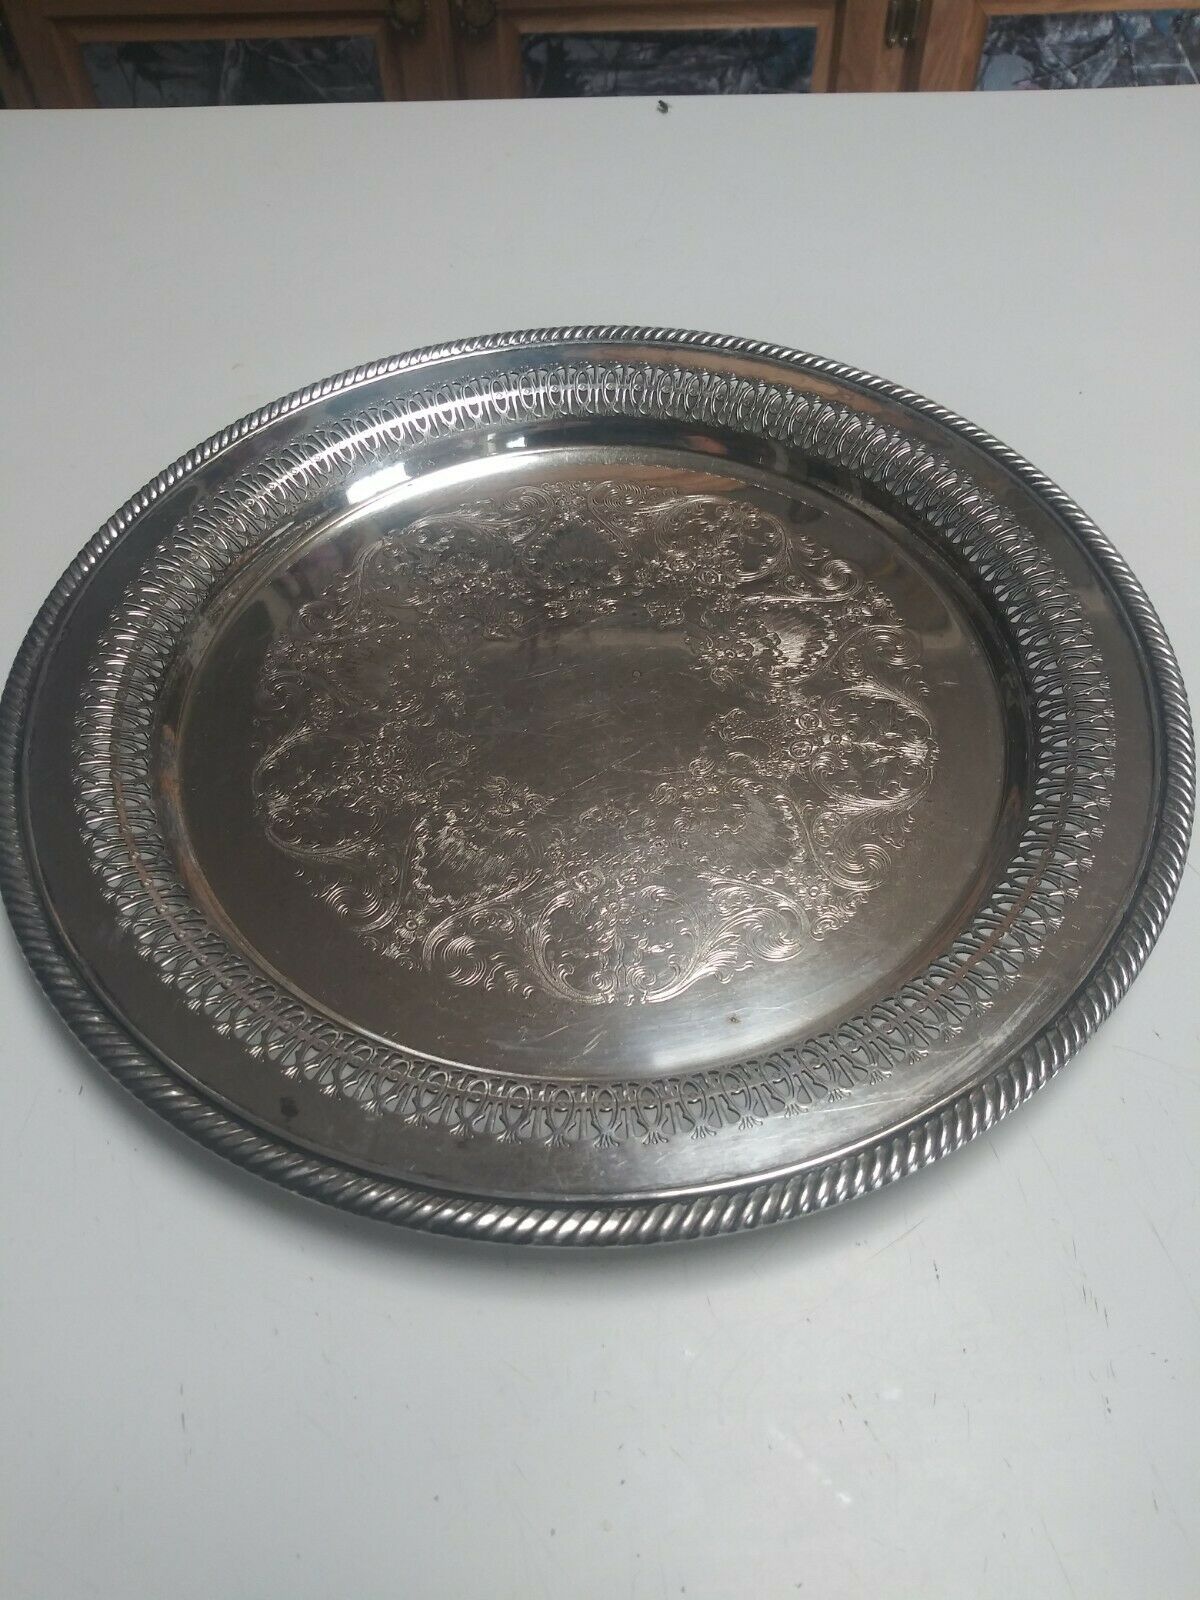 Vintage Wm Rogers Silverplate, Round Reticulated Serving Platter #170